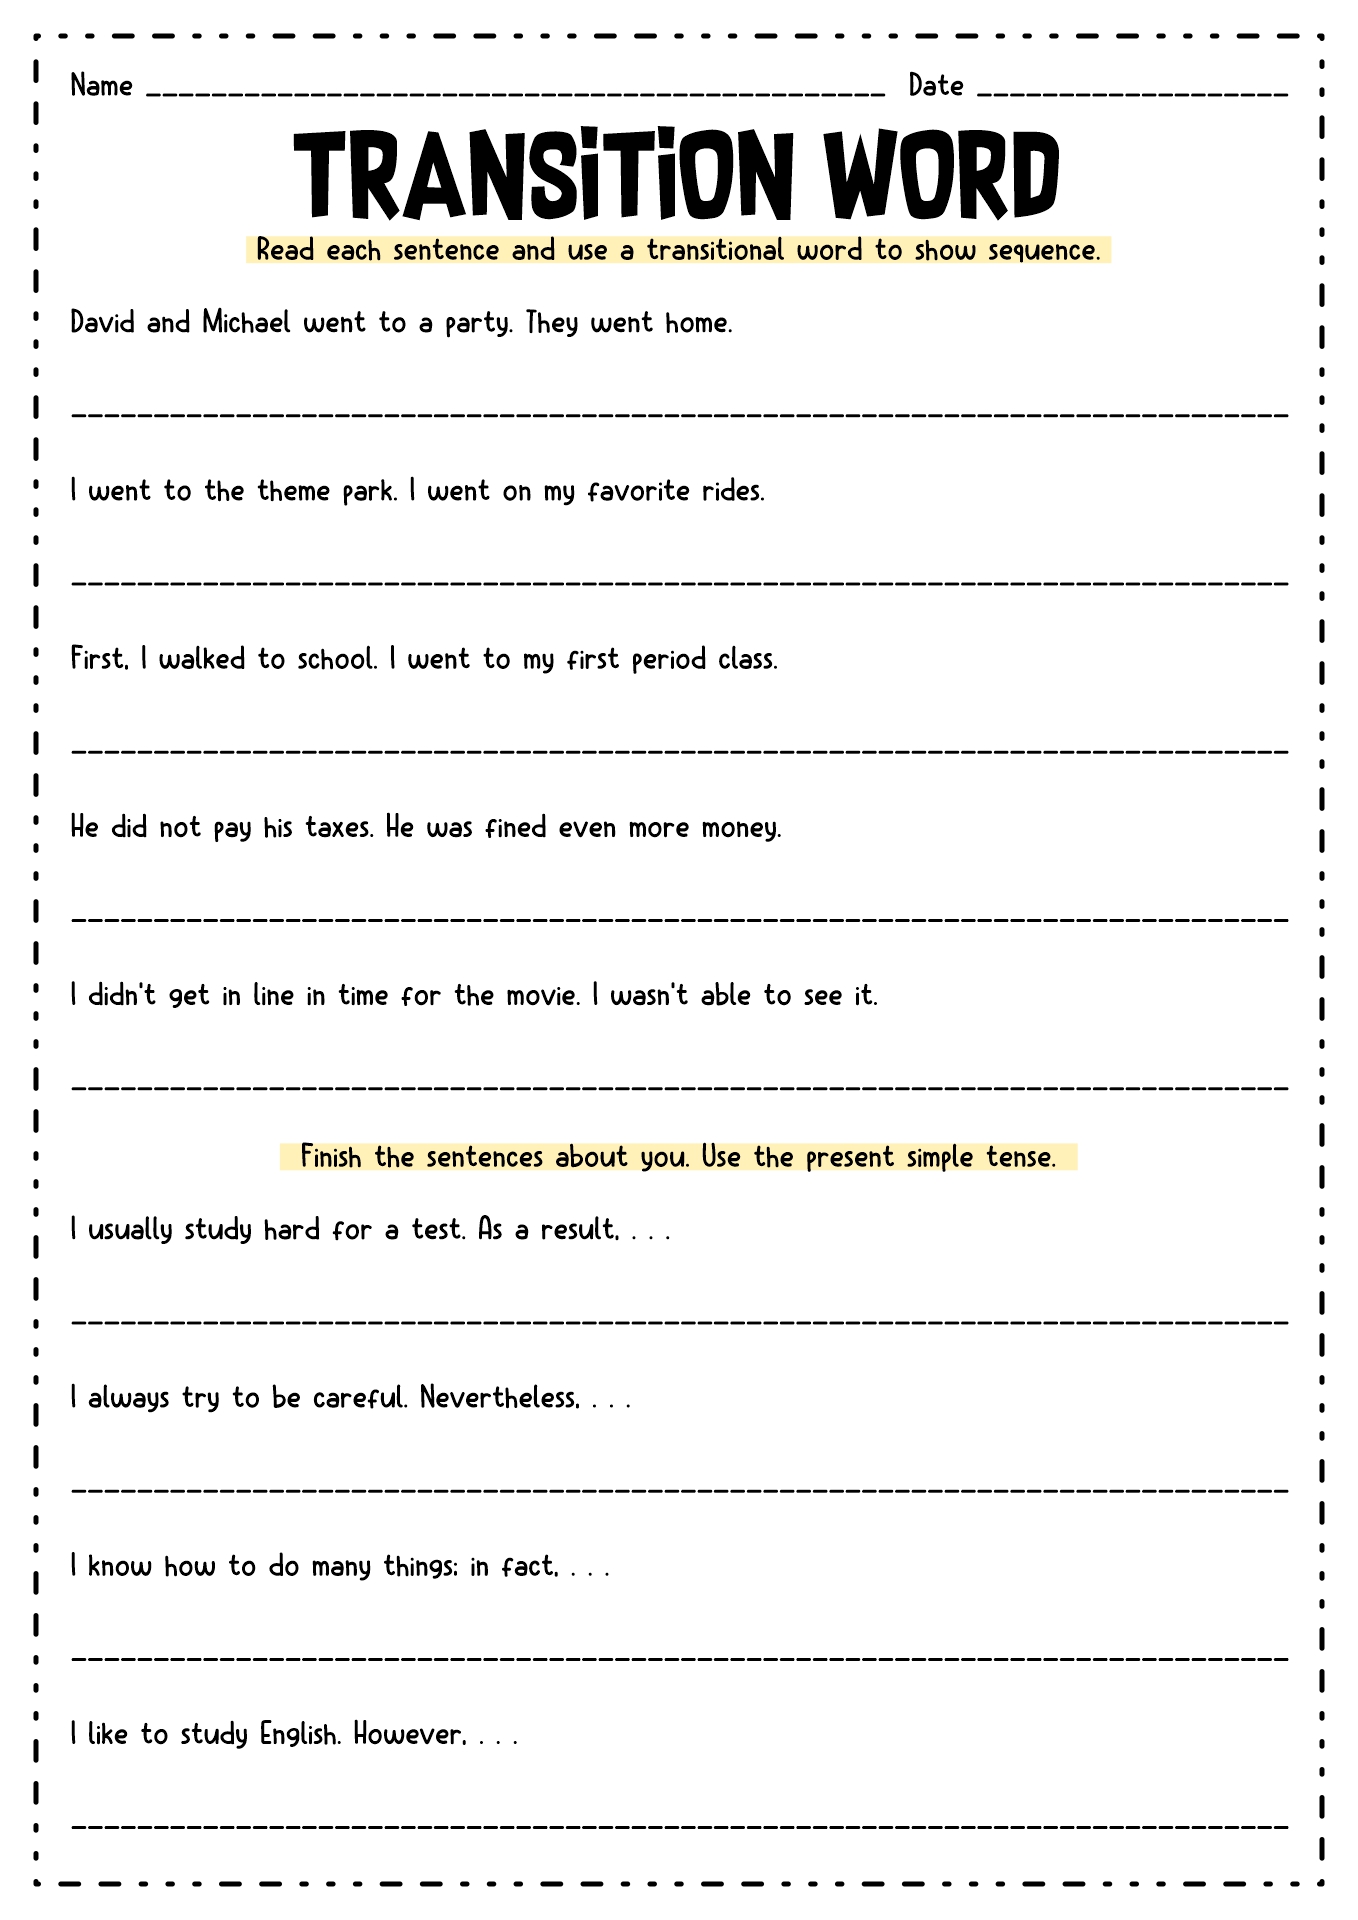 Transition Words and Phrases Worksheets